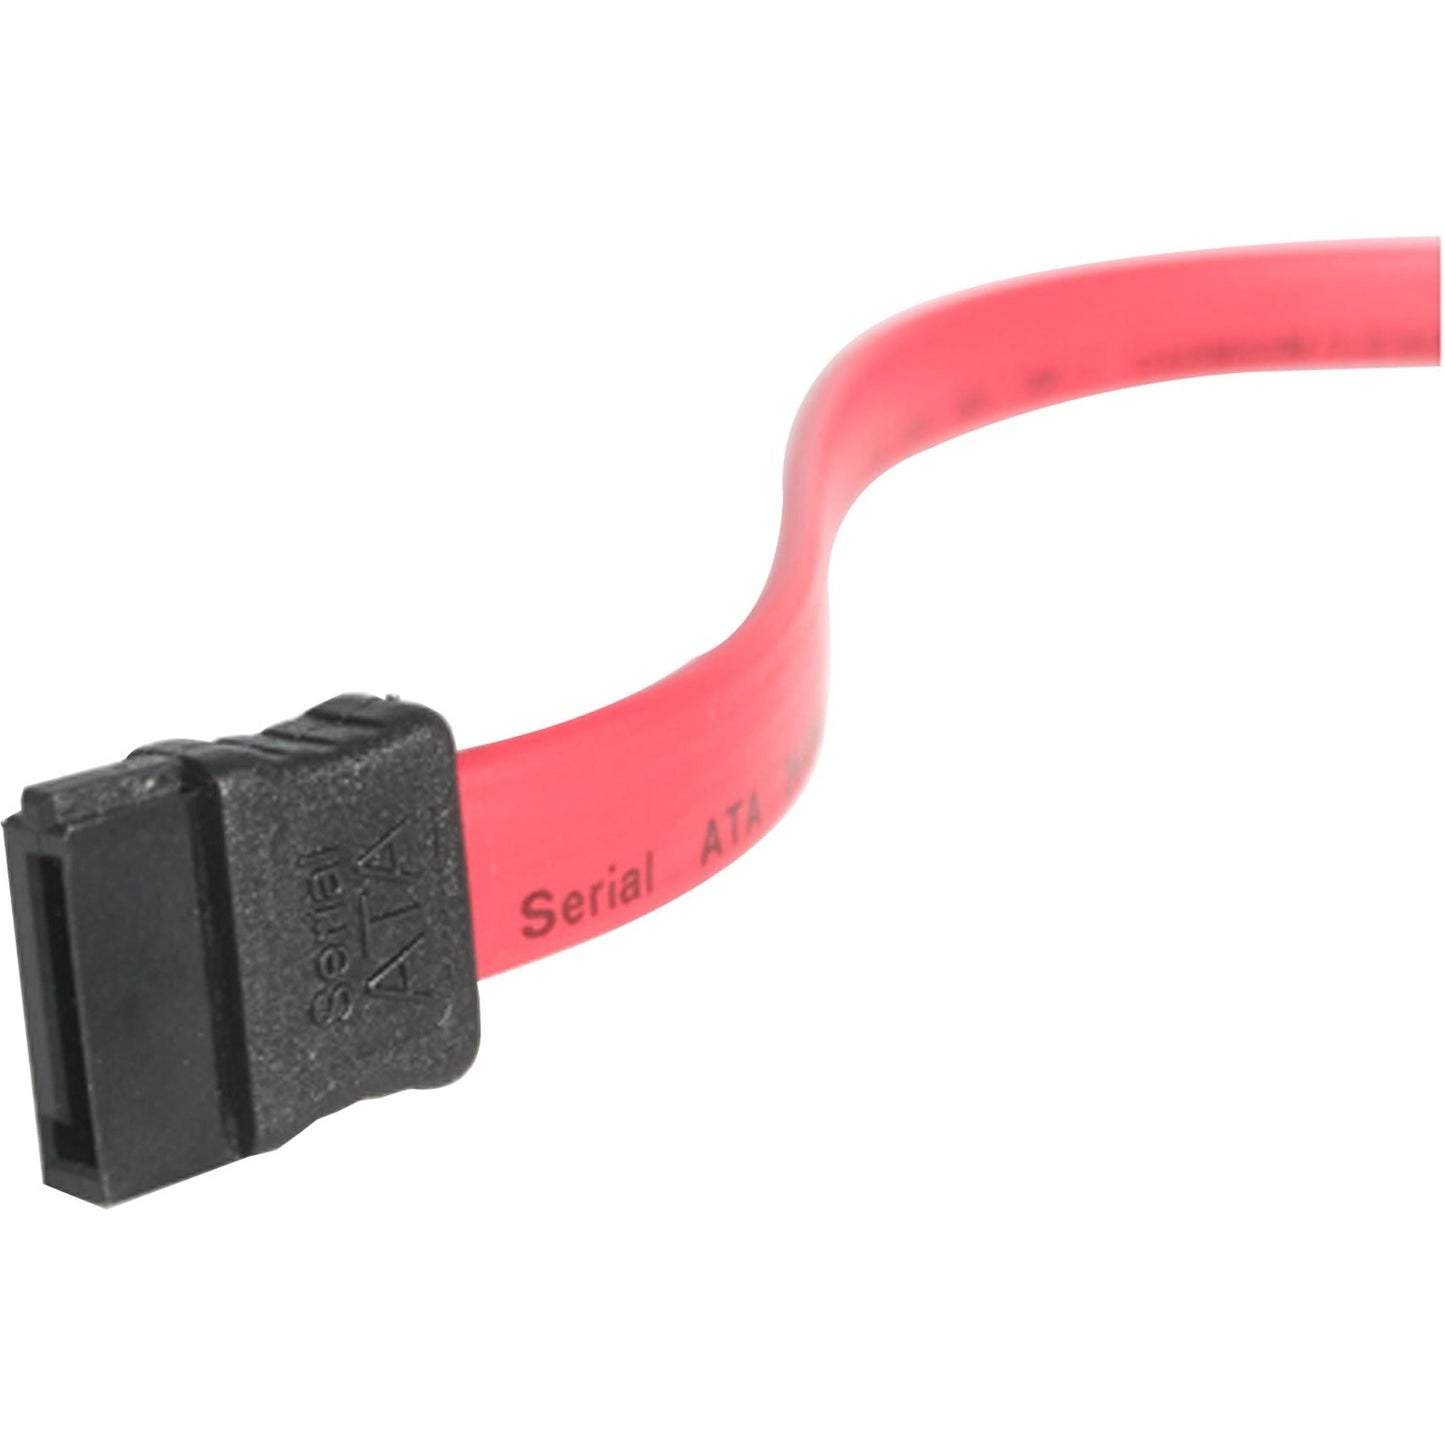 StarTech.com S18in SAS 29 Pin to SATA Cable with LP4 Power